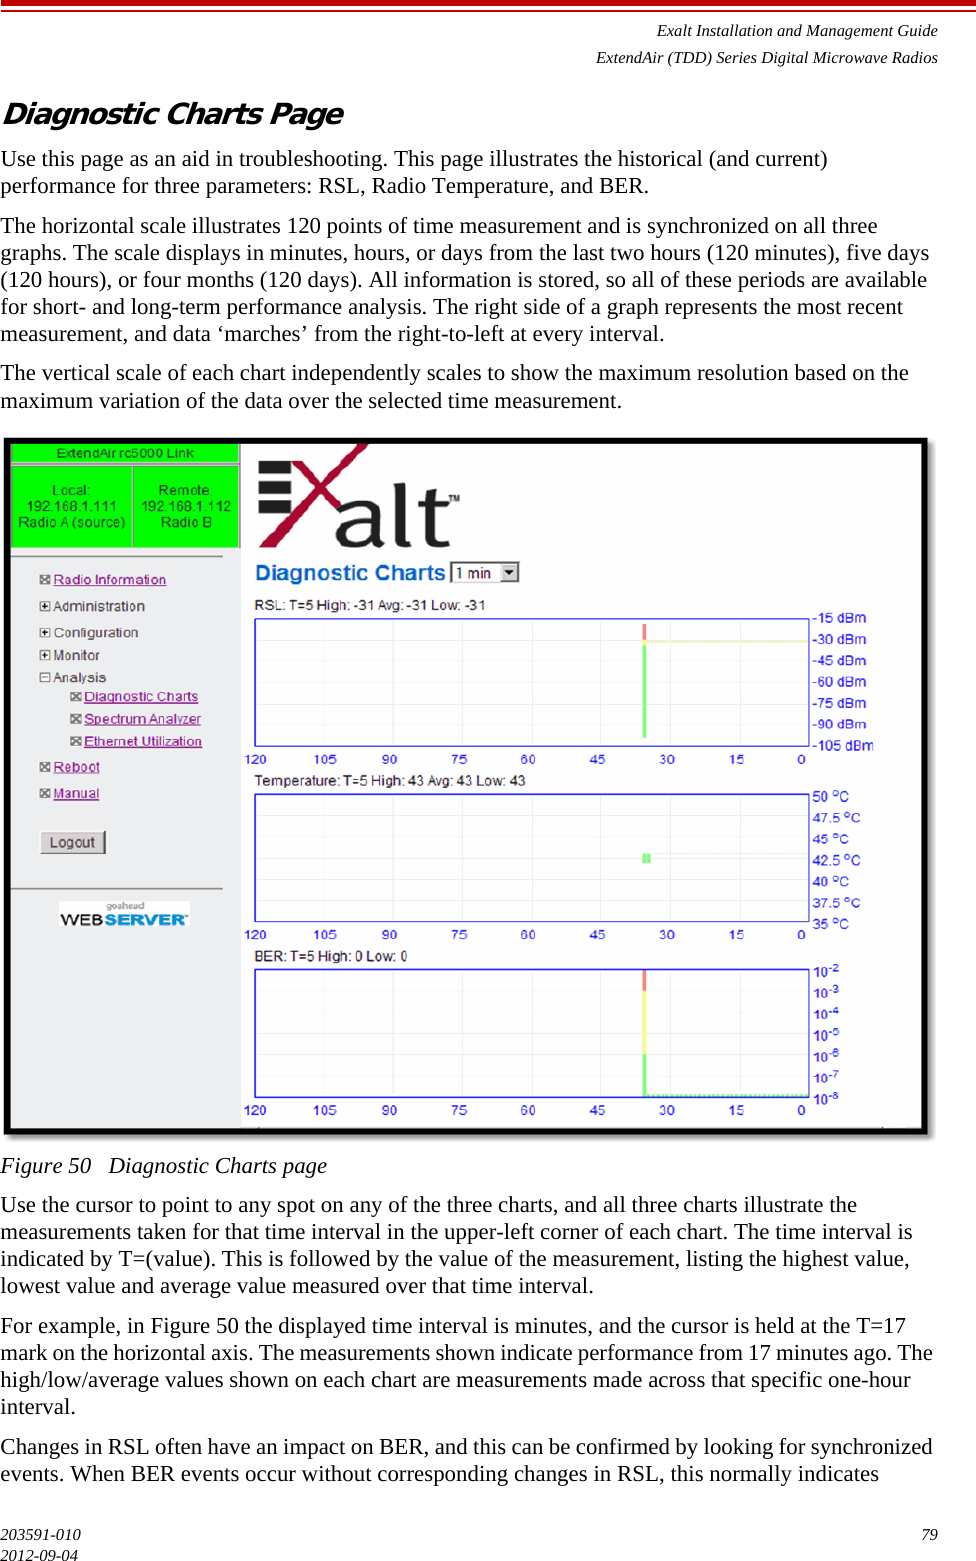 Exalt Installation and Management GuideExtendAir (TDD) Series Digital Microwave Radios203591-010 792012-09-04Diagnostic Charts PageUse this page as an aid in troubleshooting. This page illustrates the historical (and current) performance for three parameters: RSL, Radio Temperature, and BER.The horizontal scale illustrates 120 points of time measurement and is synchronized on all three graphs. The scale displays in minutes, hours, or days from the last two hours (120 minutes), five days (120 hours), or four months (120 days). All information is stored, so all of these periods are available for short- and long-term performance analysis. The right side of a graph represents the most recent measurement, and data ‘marches’ from the right-to-left at every interval.The vertical scale of each chart independently scales to show the maximum resolution based on the maximum variation of the data over the selected time measurement. Figure 50   Diagnostic Charts pageUse the cursor to point to any spot on any of the three charts, and all three charts illustrate the measurements taken for that time interval in the upper-left corner of each chart. The time interval is indicated by T=(value). This is followed by the value of the measurement, listing the highest value, lowest value and average value measured over that time interval.For example, in Figure 50 the displayed time interval is minutes, and the cursor is held at the T=17 mark on the horizontal axis. The measurements shown indicate performance from 17 minutes ago. The high/low/average values shown on each chart are measurements made across that specific one-hour interval.Changes in RSL often have an impact on BER, and this can be confirmed by looking for synchronized events. When BER events occur without corresponding changes in RSL, this normally indicates 